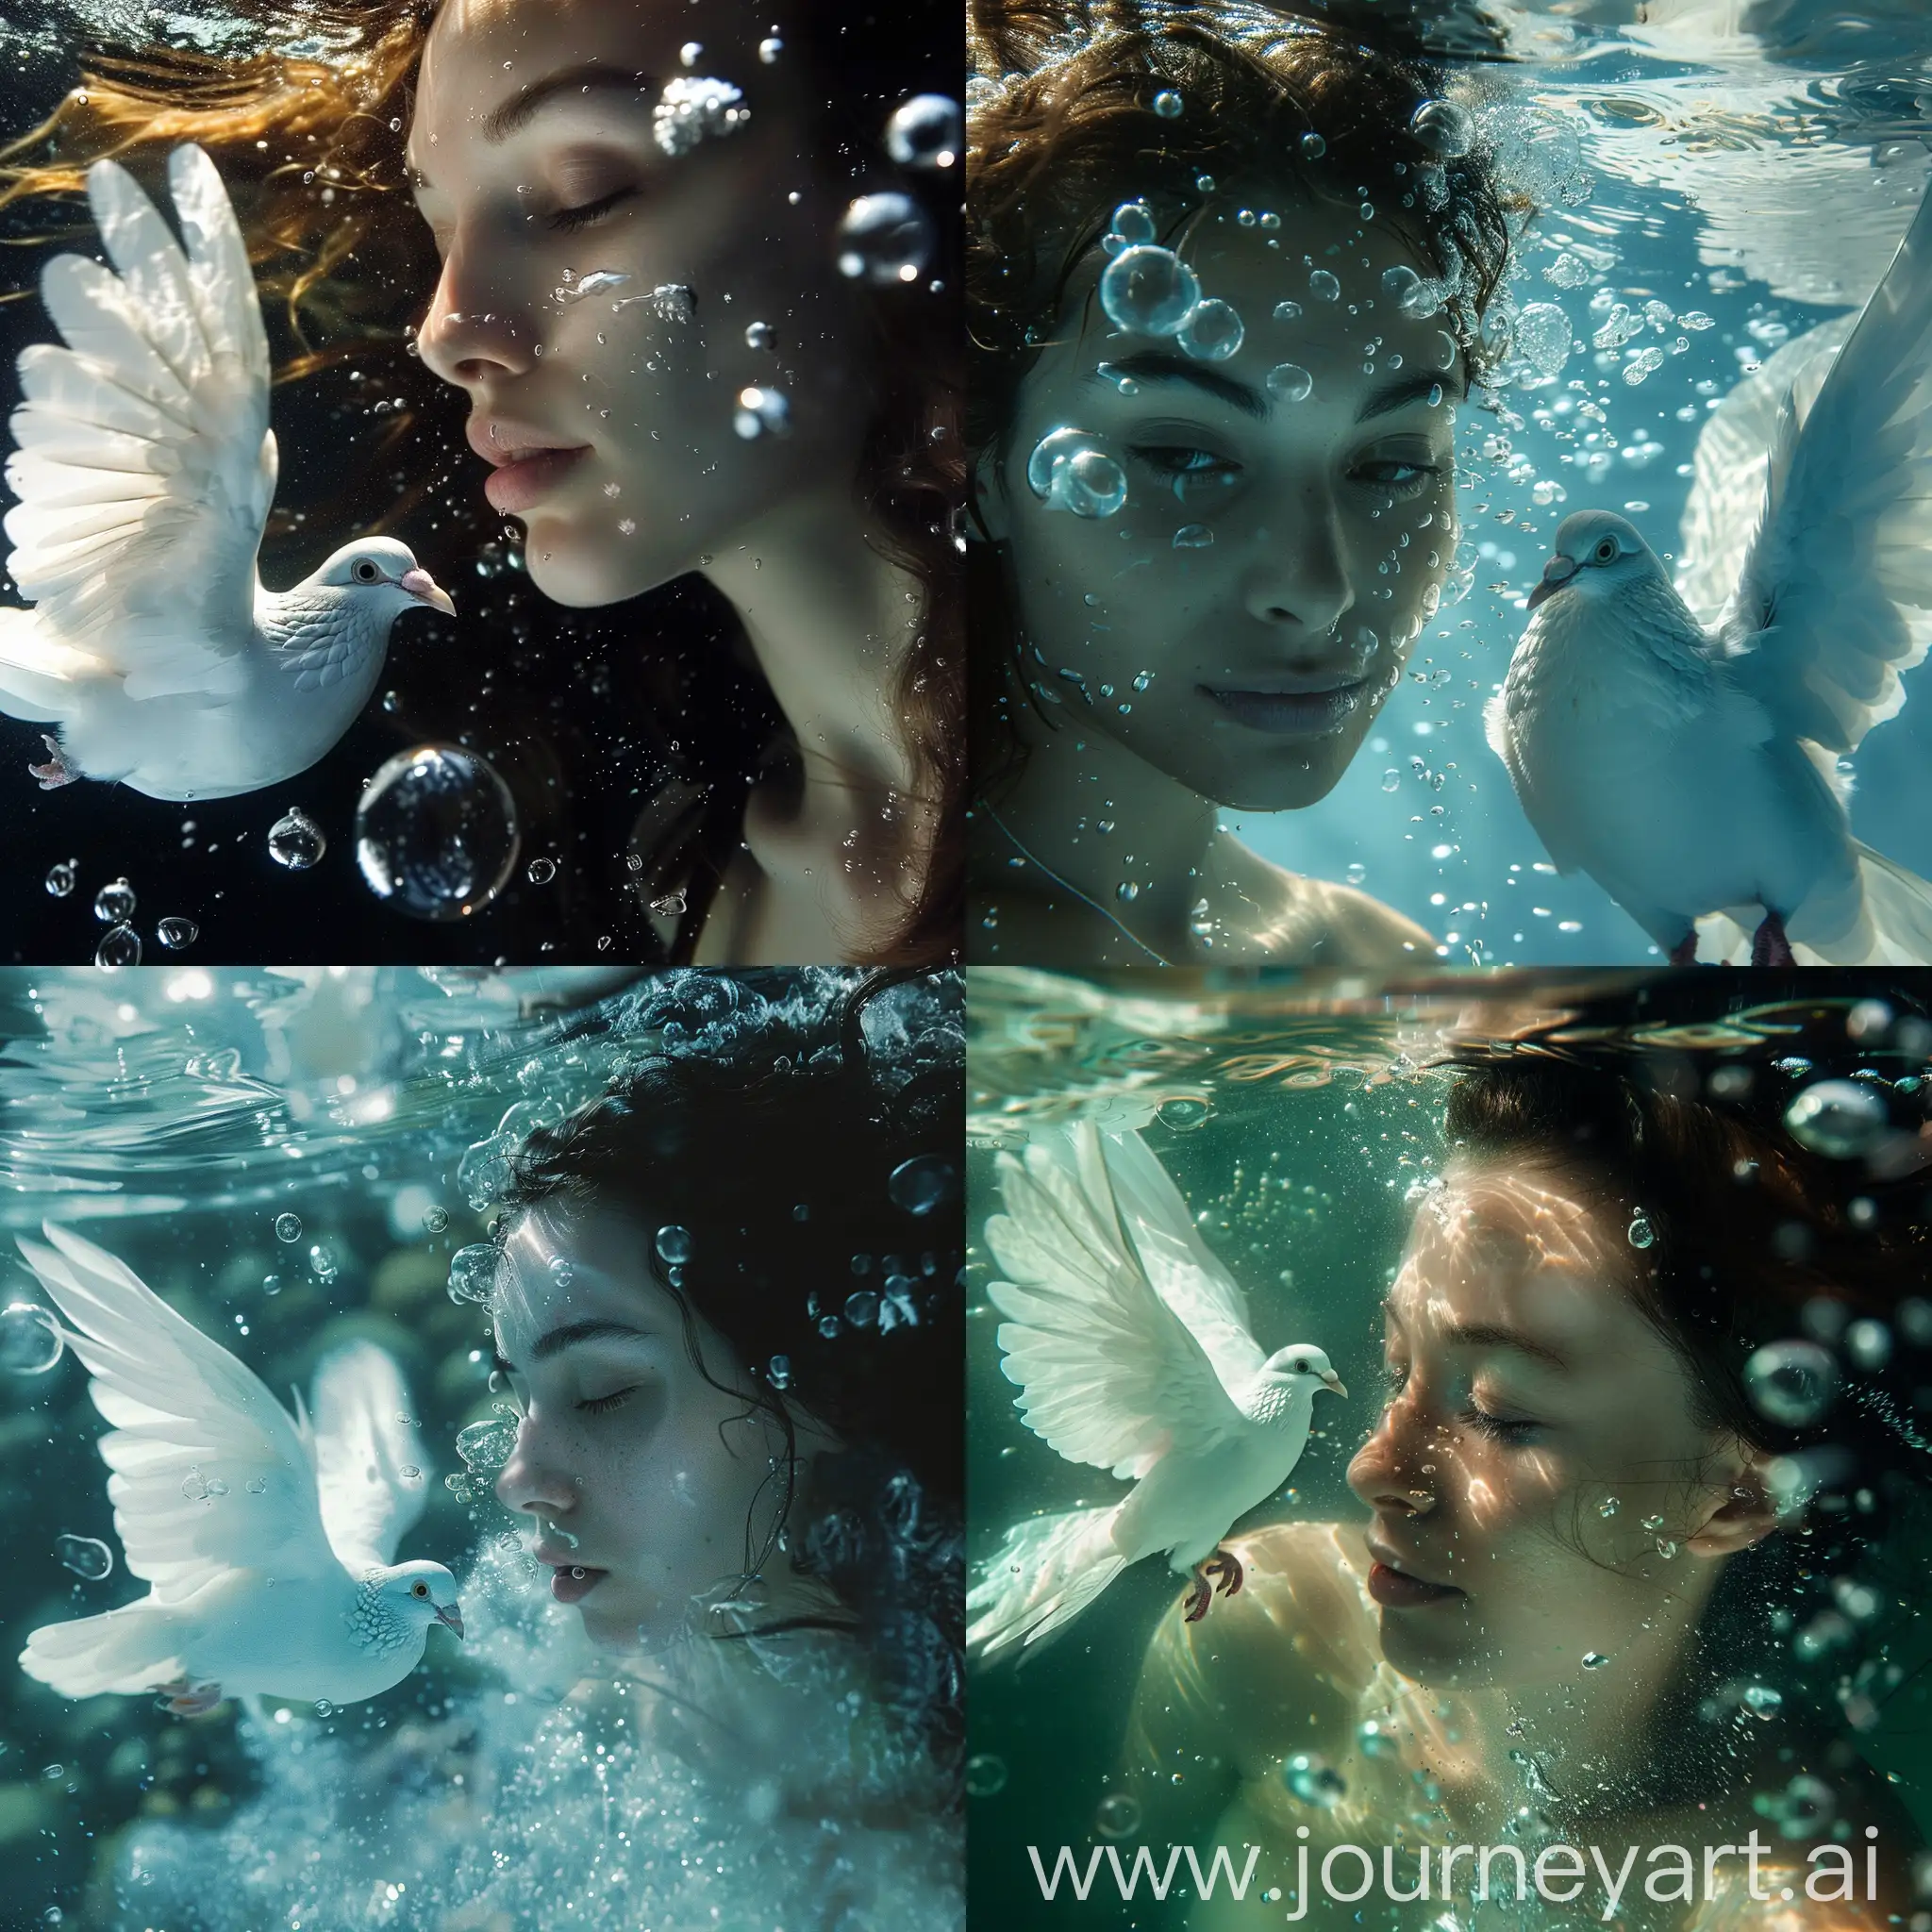 A captivating cinematic image of a woman underwater, very few large bubbles, and a pure white dove swimming next to her. 